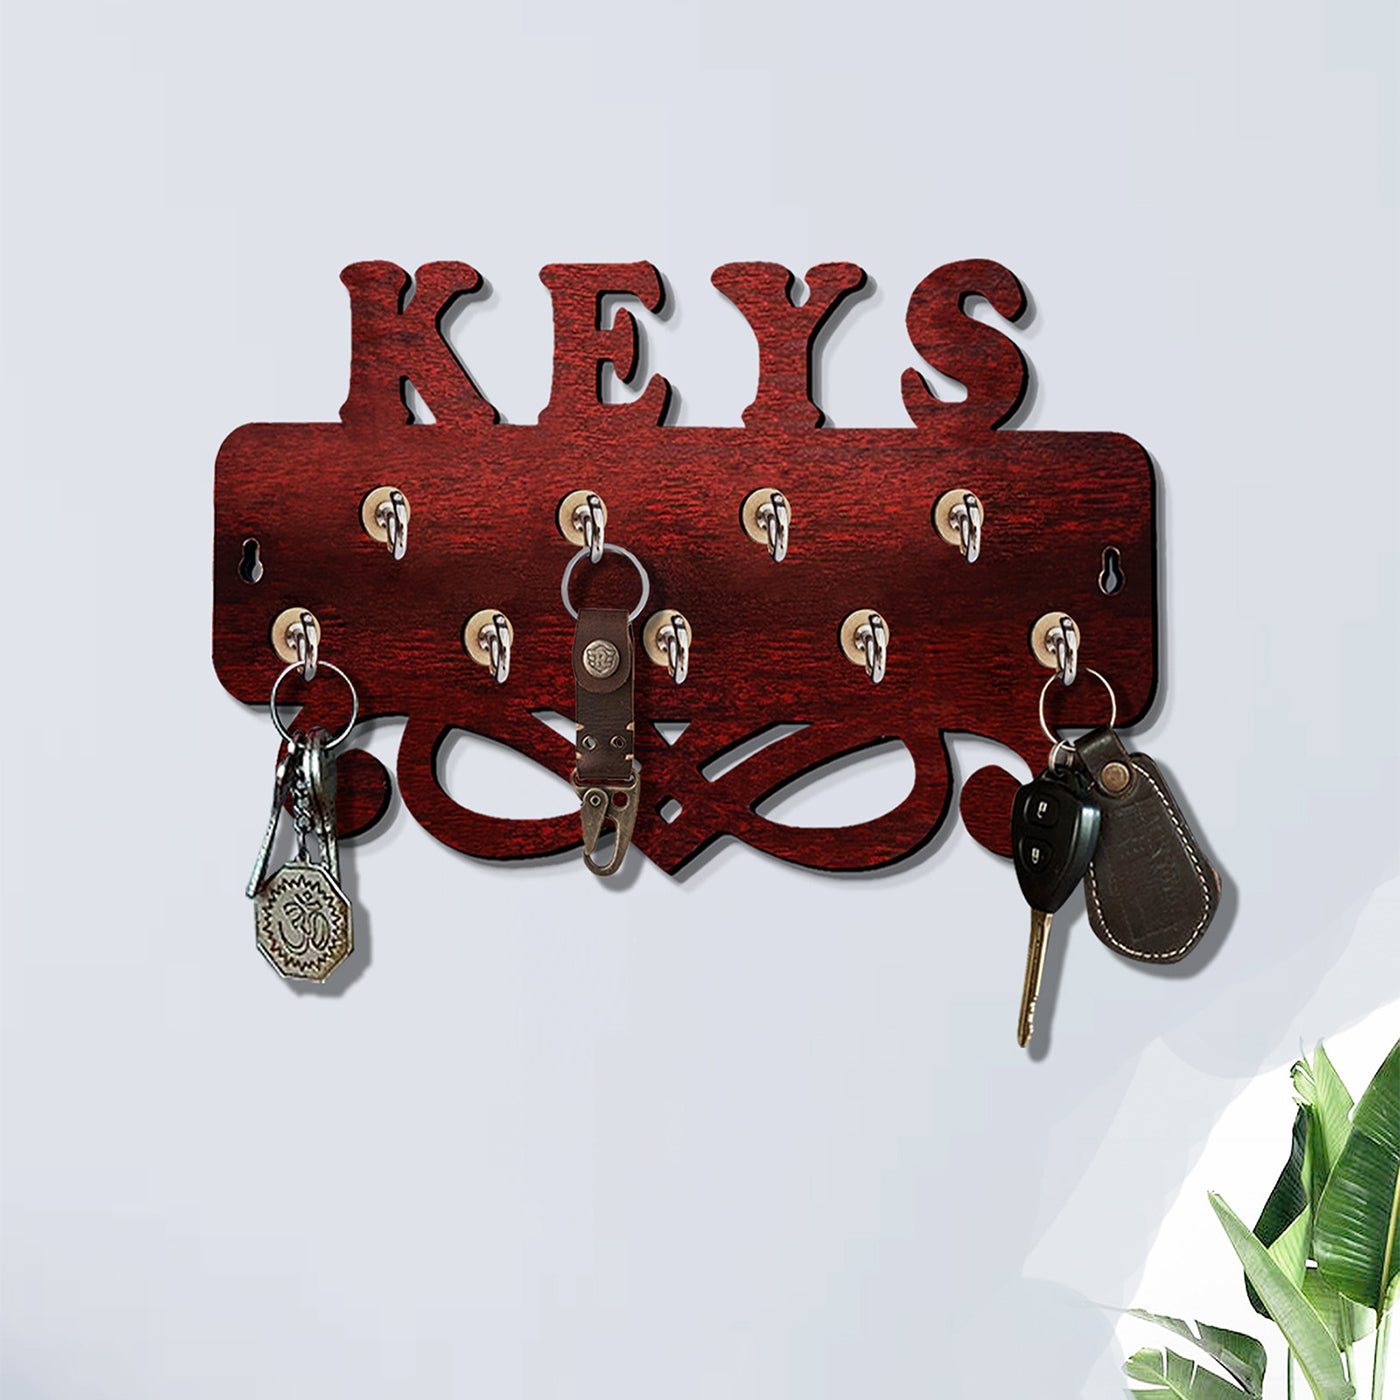 Wall key holder | wooden | 6 hooks | home decor | gifting | wall decor